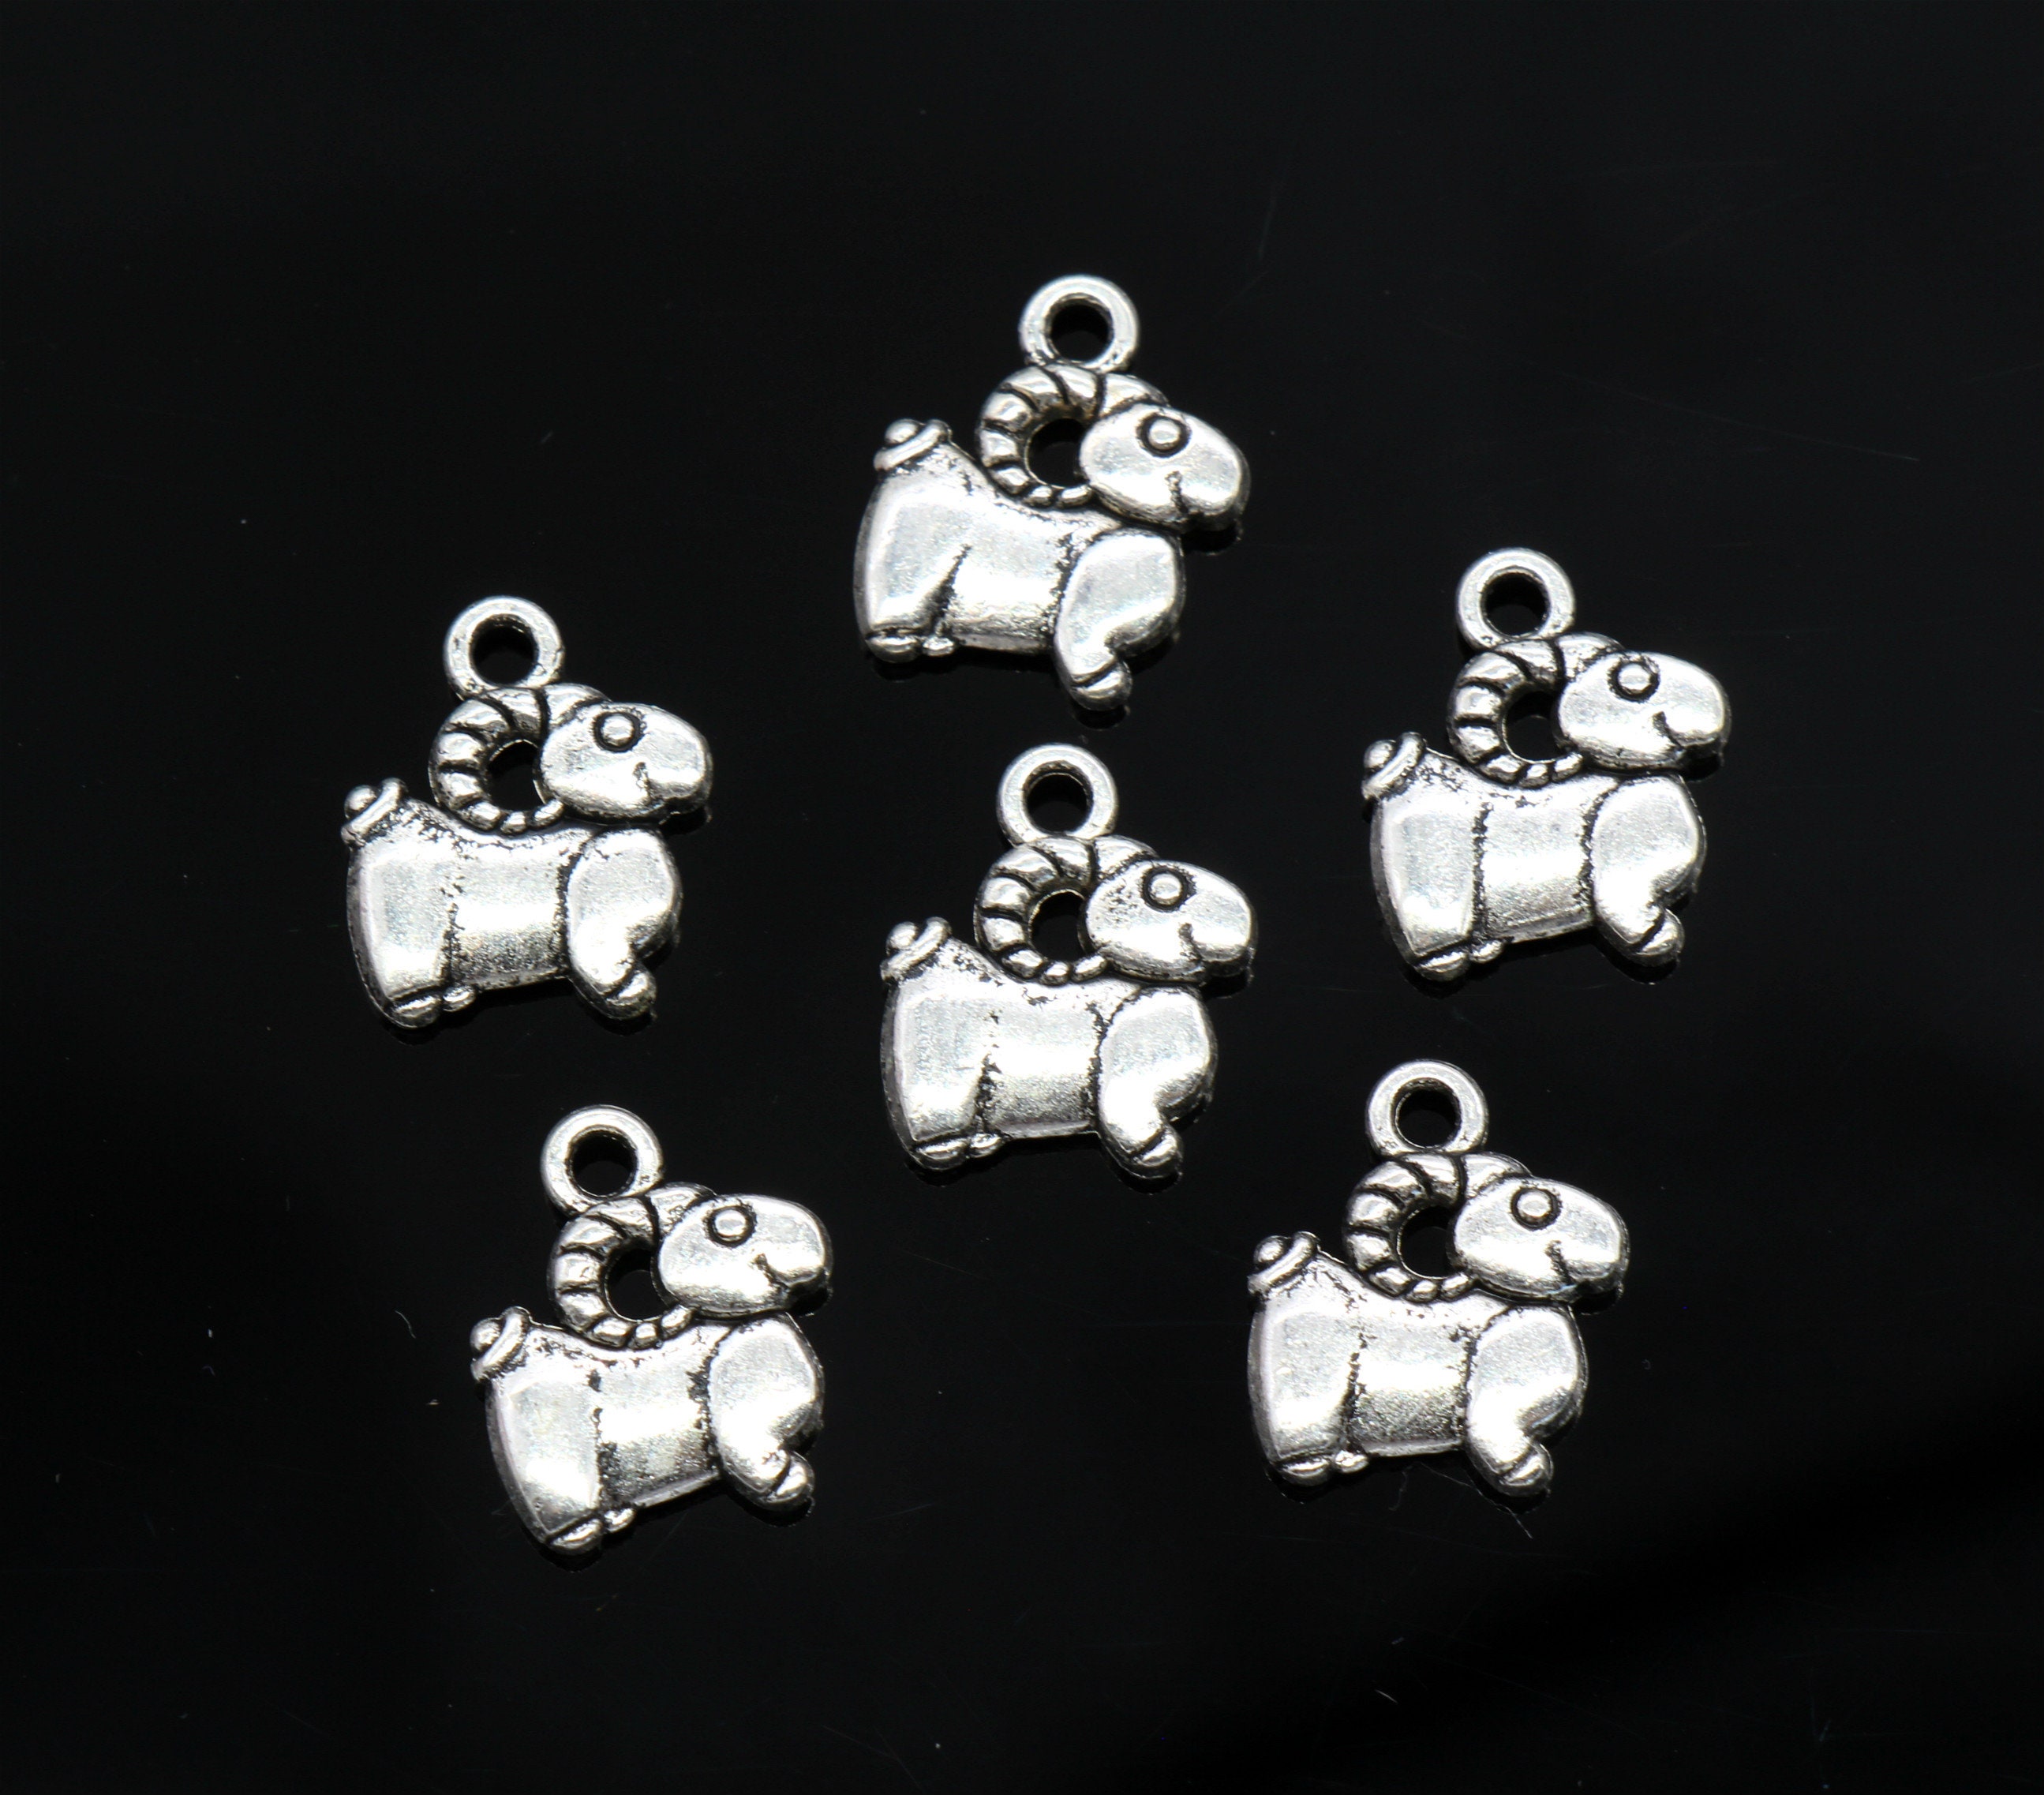 6 Pcs Ram Charms Antique Silver Tone 2 Sided 12x15mm - Yd0704